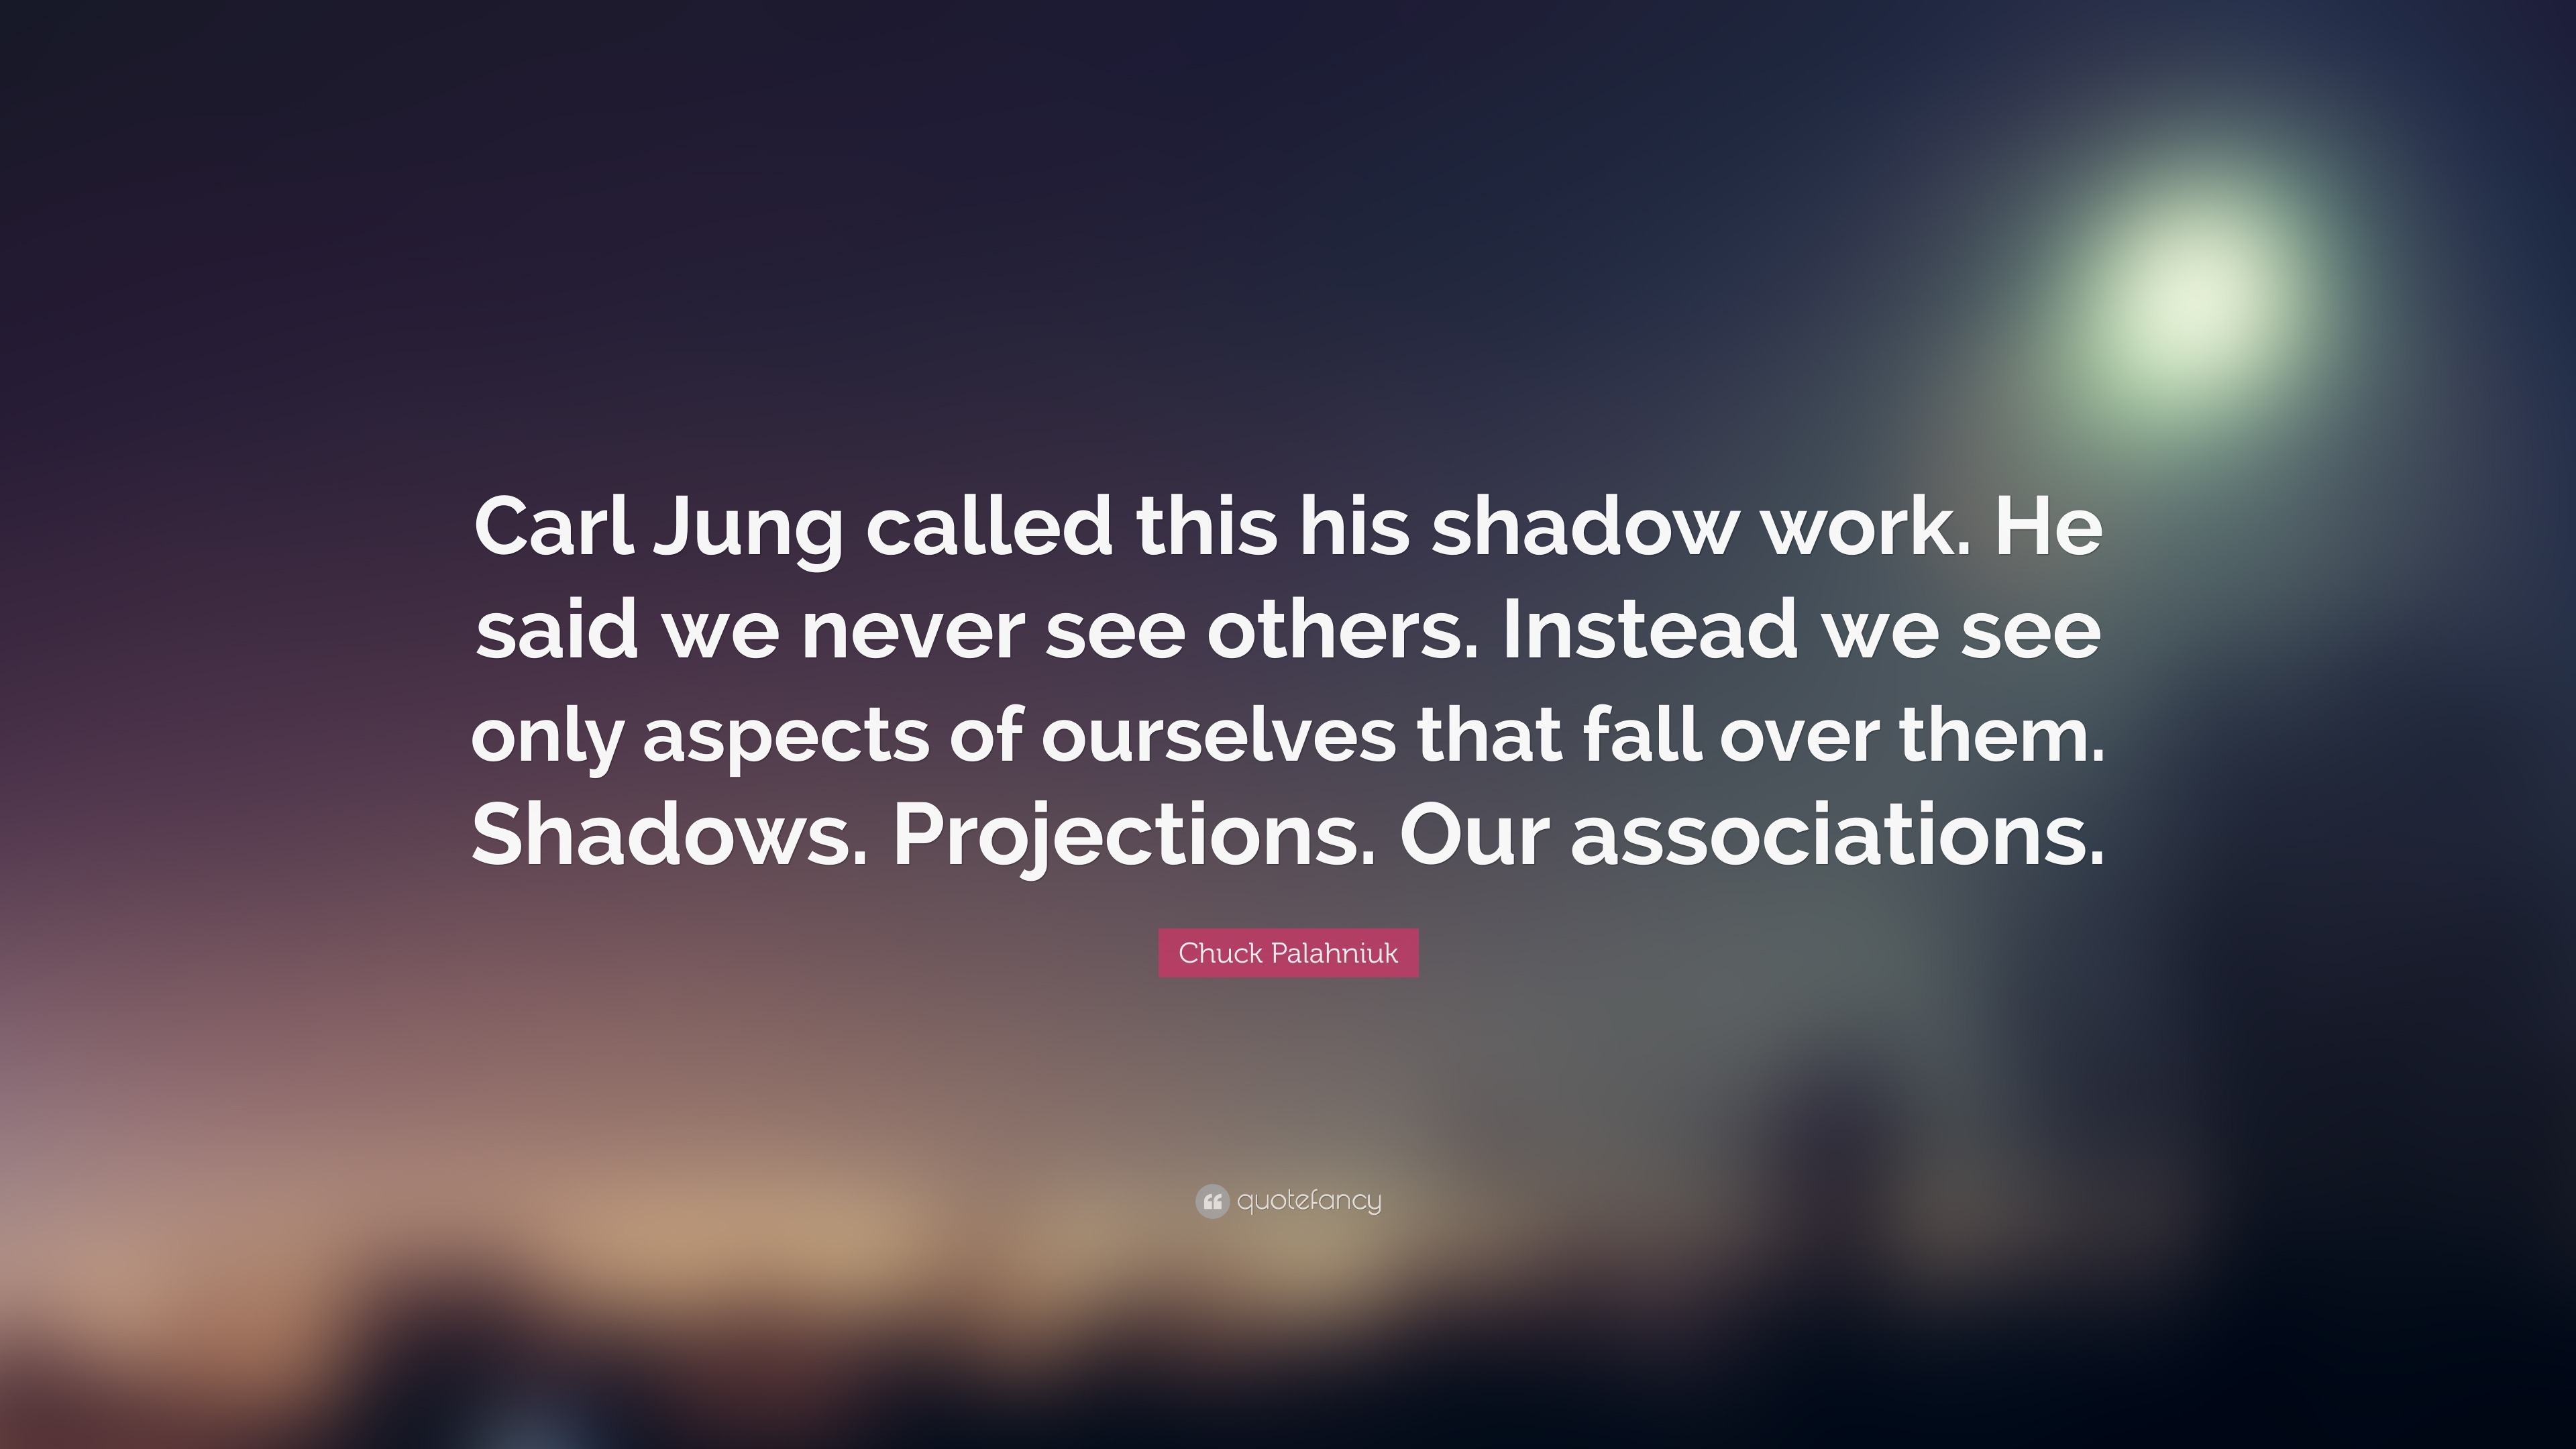 Chuck Palahniuk Quote: “Carl Jung called this his shadow work. He said we  never see others. Instead we see only aspects of ourselves that fall o...”